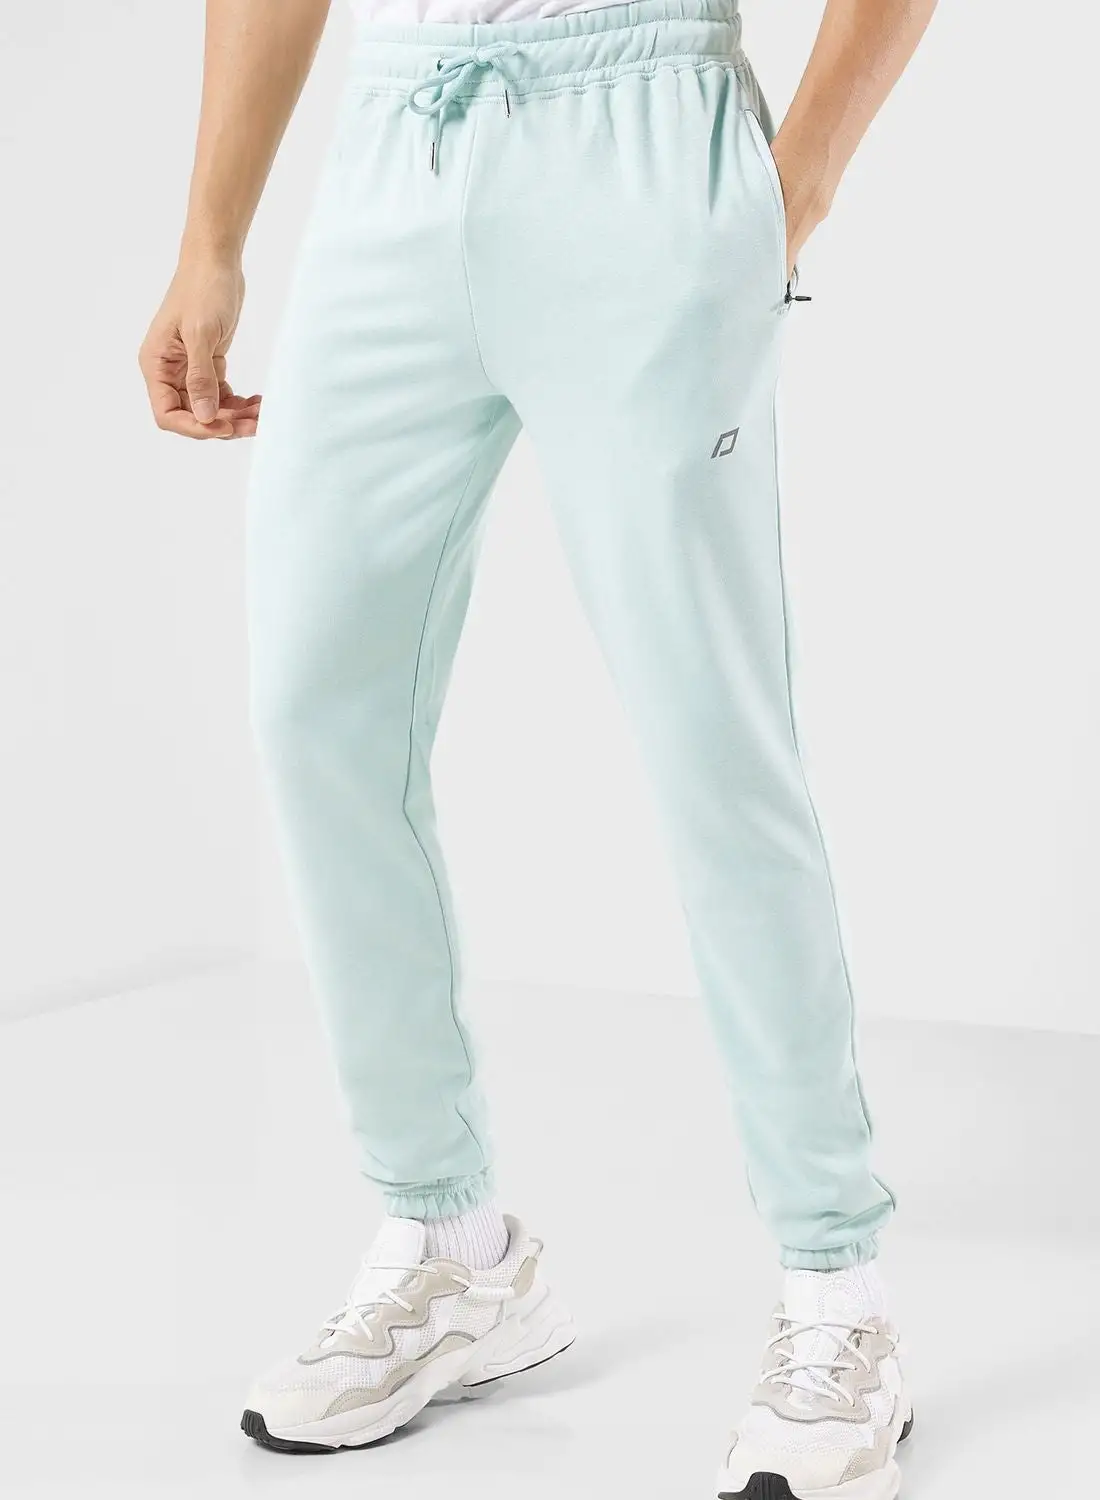 FRWD Athleisure Essential Joggers